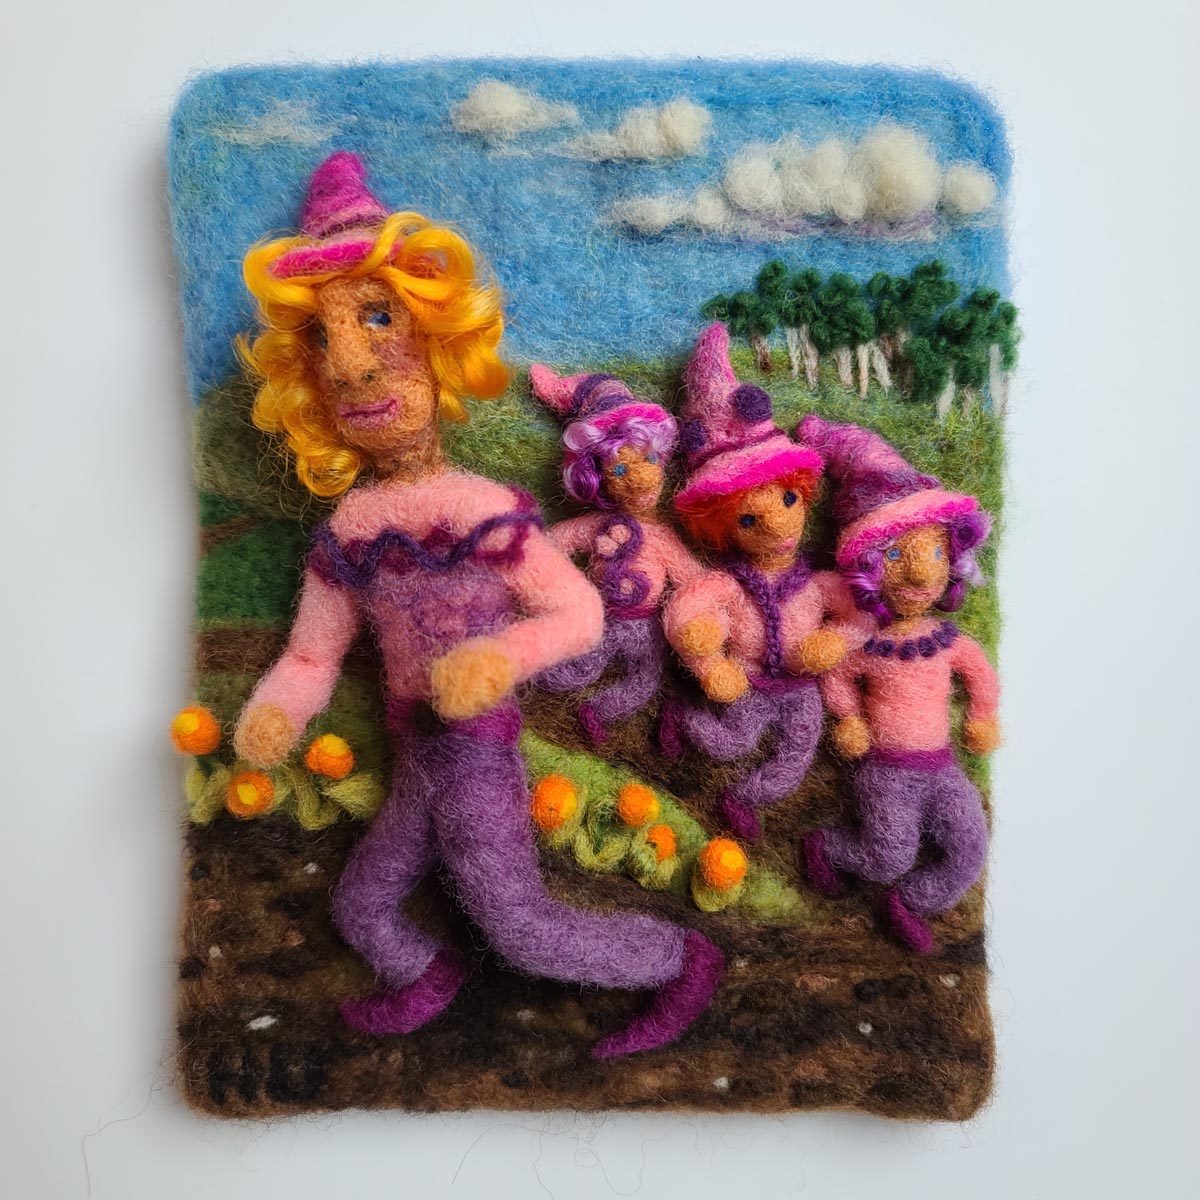 Needle Felted Children's Book Illustrations by Hillary Dow